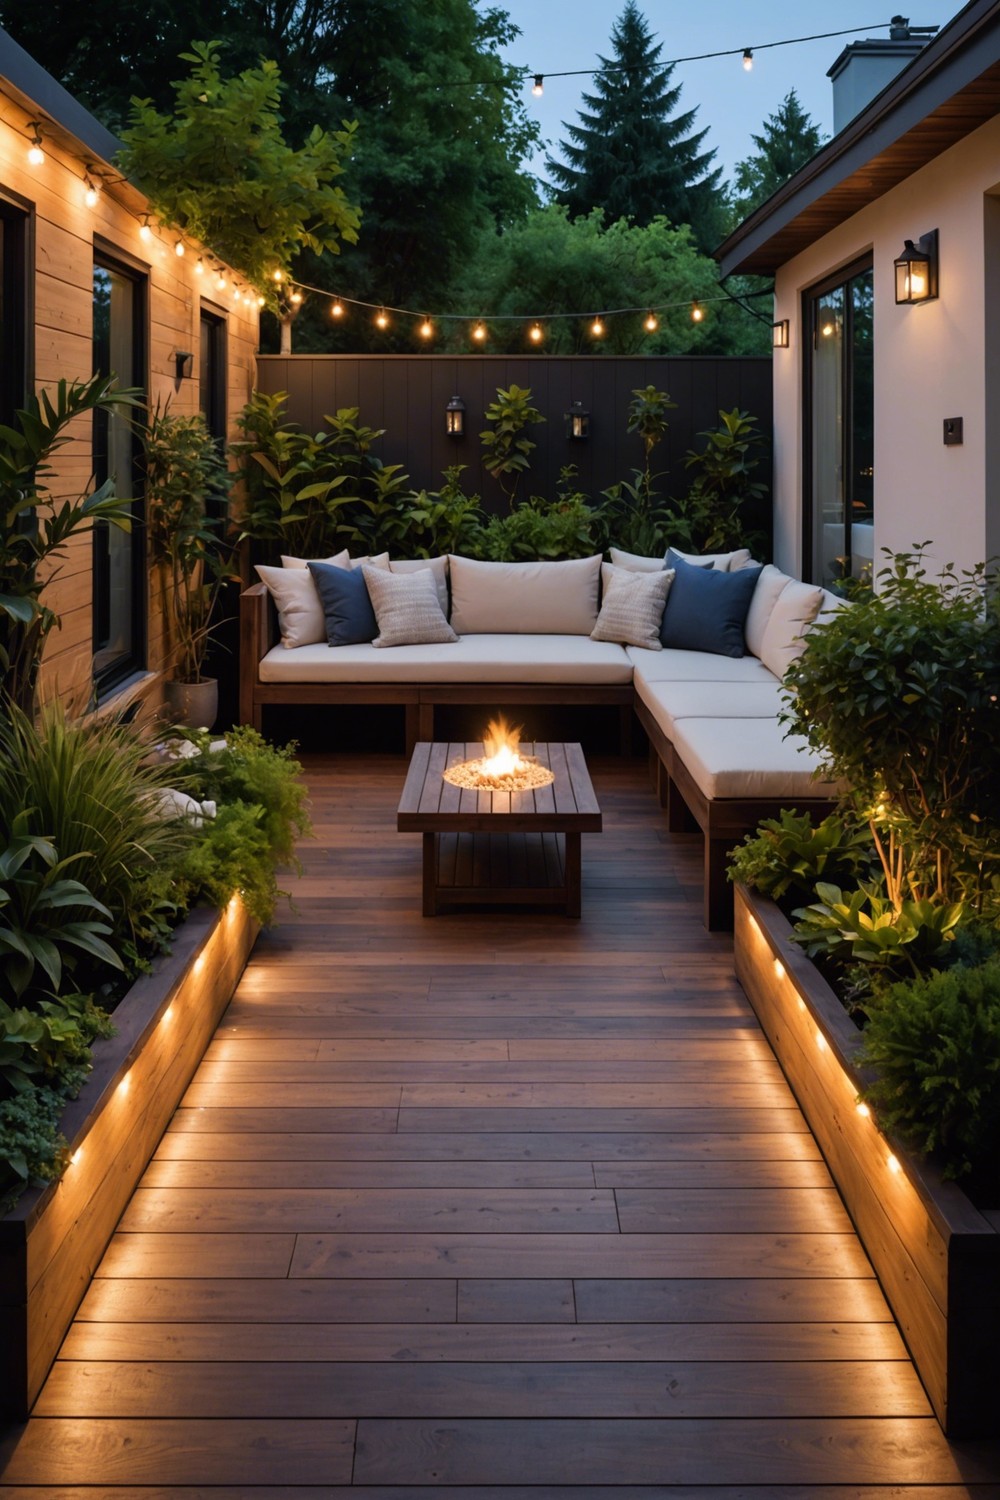 Wooden Decking with Built-in Lighting